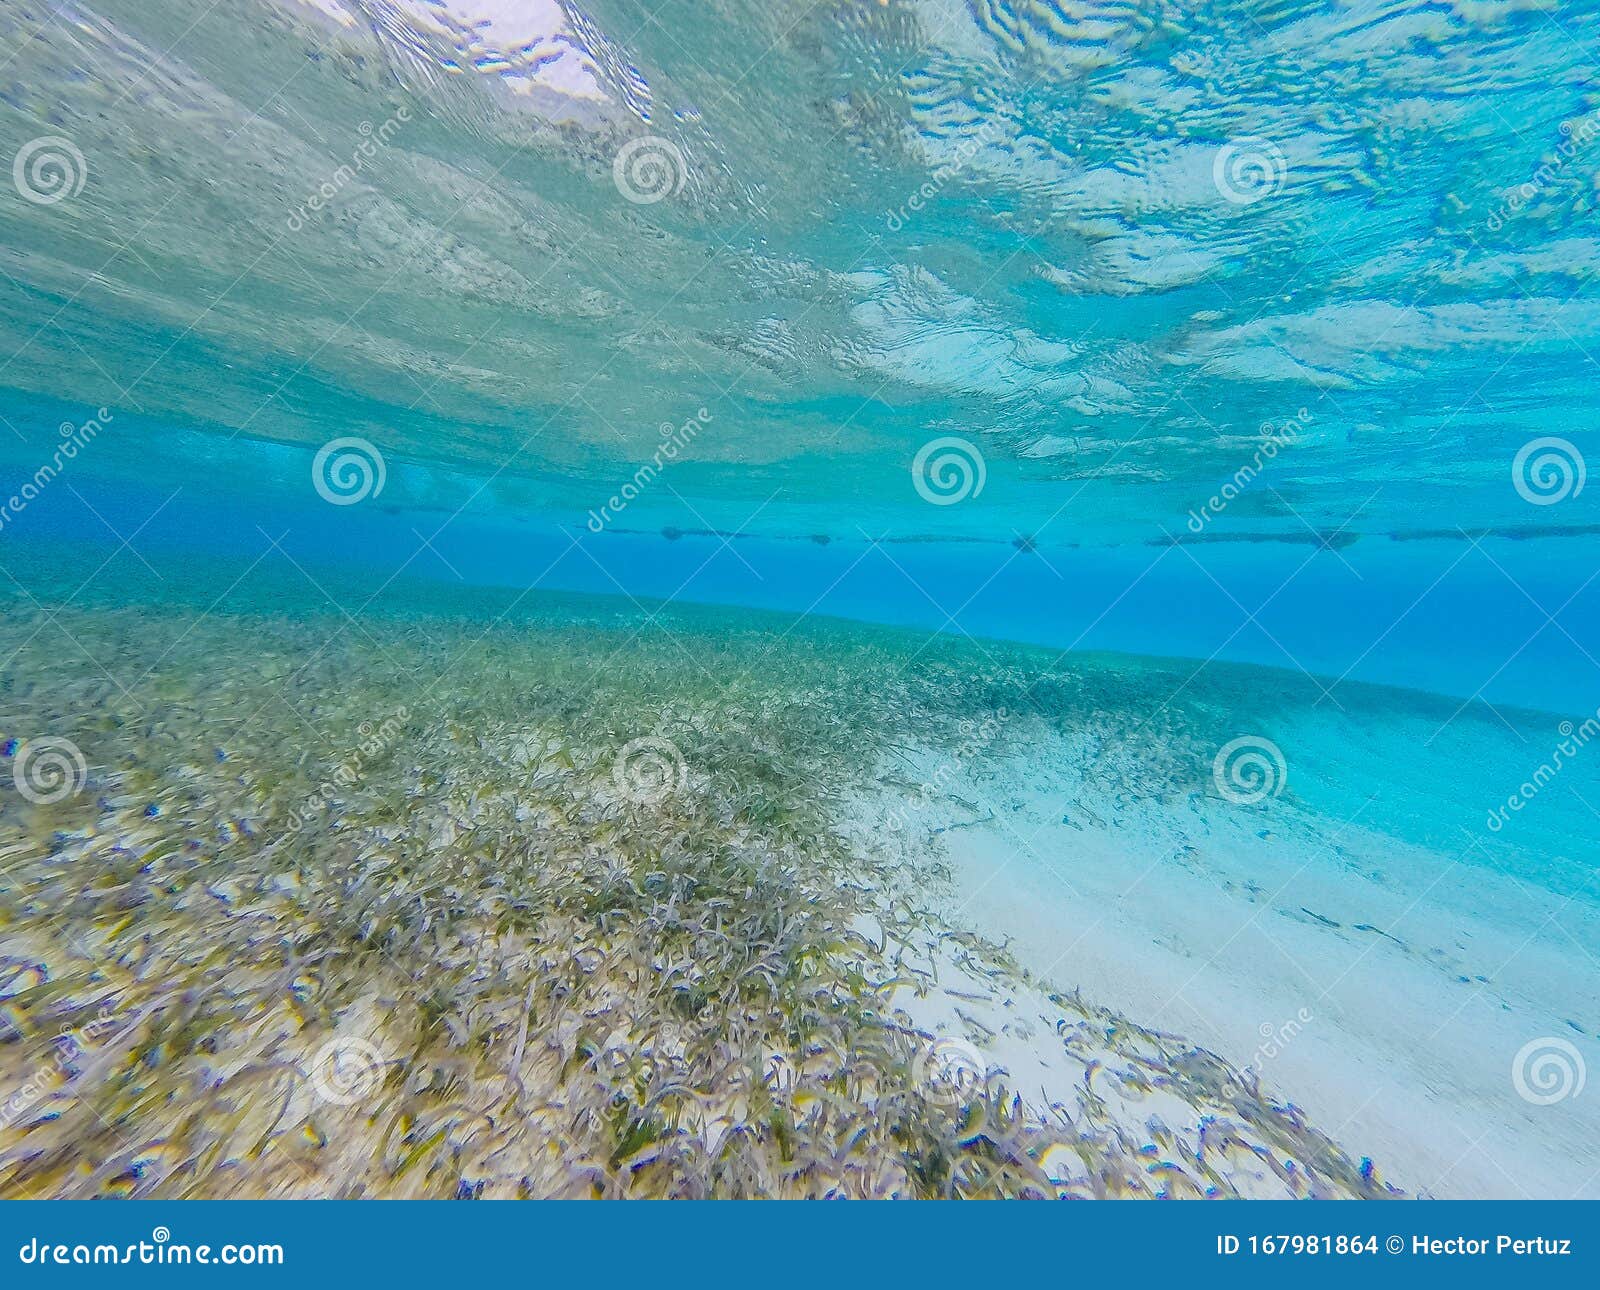 Underwater Views of the Sea Surface Stock Photo - Image of adventure ...